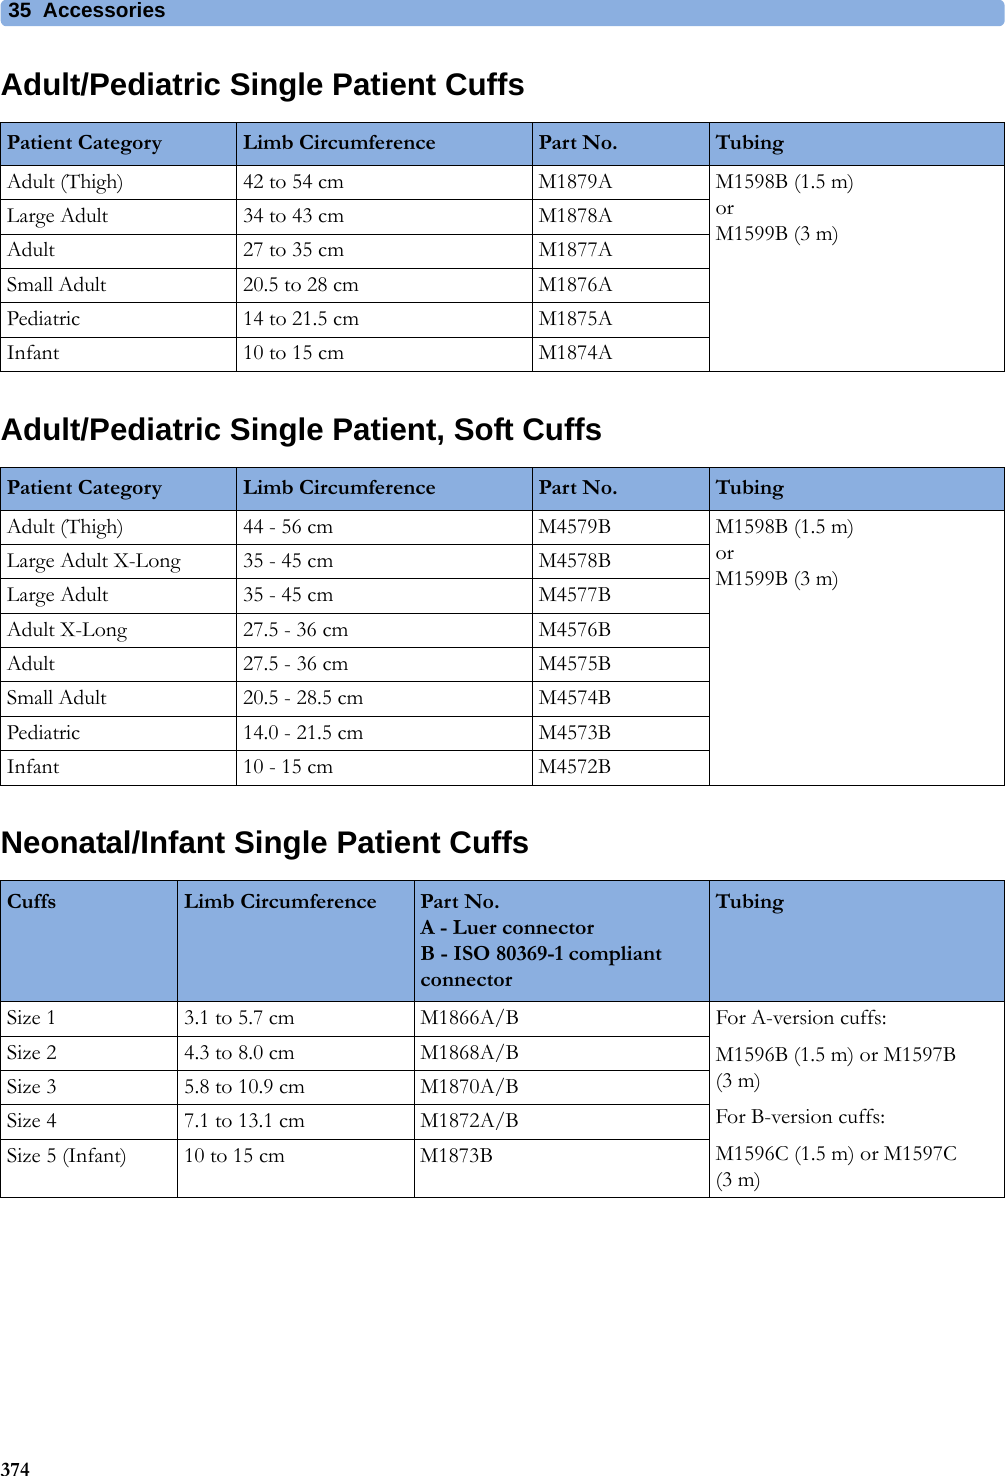 35 Accessories374Adult/Pediatric Single Patient CuffsAdult/Pediatric Single Patient, Soft CuffsNeonatal/Infant Single Patient CuffsPatient Category Limb Circumference Part No. TubingAdult (Thigh) 42 to 54 cm M1879A M1598B (1.5 m) orM1599B (3 m)Large Adult 34 to 43 cm M1878AAdult 27 to 35 cm M1877ASmall Adult 20.5 to 28 cm M1876APediatric 14 to 21.5 cm M1875AInfant 10 to 15 cm M1874APatient Category Limb Circumference Part No. TubingAdult (Thigh) 44 - 56 cm M4579B M1598B (1.5 m) orM1599B (3 m)Large Adult X-Long 35 - 45 cm M4578BLarge Adult 35 - 45 cm M4577BAdult X-Long 27.5 - 36 cm M4576BAdult 27.5 - 36 cm M4575BSmall Adult 20.5 - 28.5 cm M4574BPediatric 14.0 - 21.5 cm M4573BInfant 10 - 15 cm M4572BCuffs Limb Circumference Part No.A - Luer connectorB - ISO 80369-1 compliant connectorTubingSize 1 3.1 to 5.7 cm M1866A/B For A-version cuffs:M1596B (1.5 m) or M1597B (3 m)For B-version cuffs:M1596C (1.5 m) or M1597C (3 m)Size 2 4.3 to 8.0 cm M1868A/BSize 3 5.8 to 10.9 cm M1870A/BSize 4 7.1 to 13.1 cm M1872A/BSize 5 (Infant) 10 to 15 cm M1873B